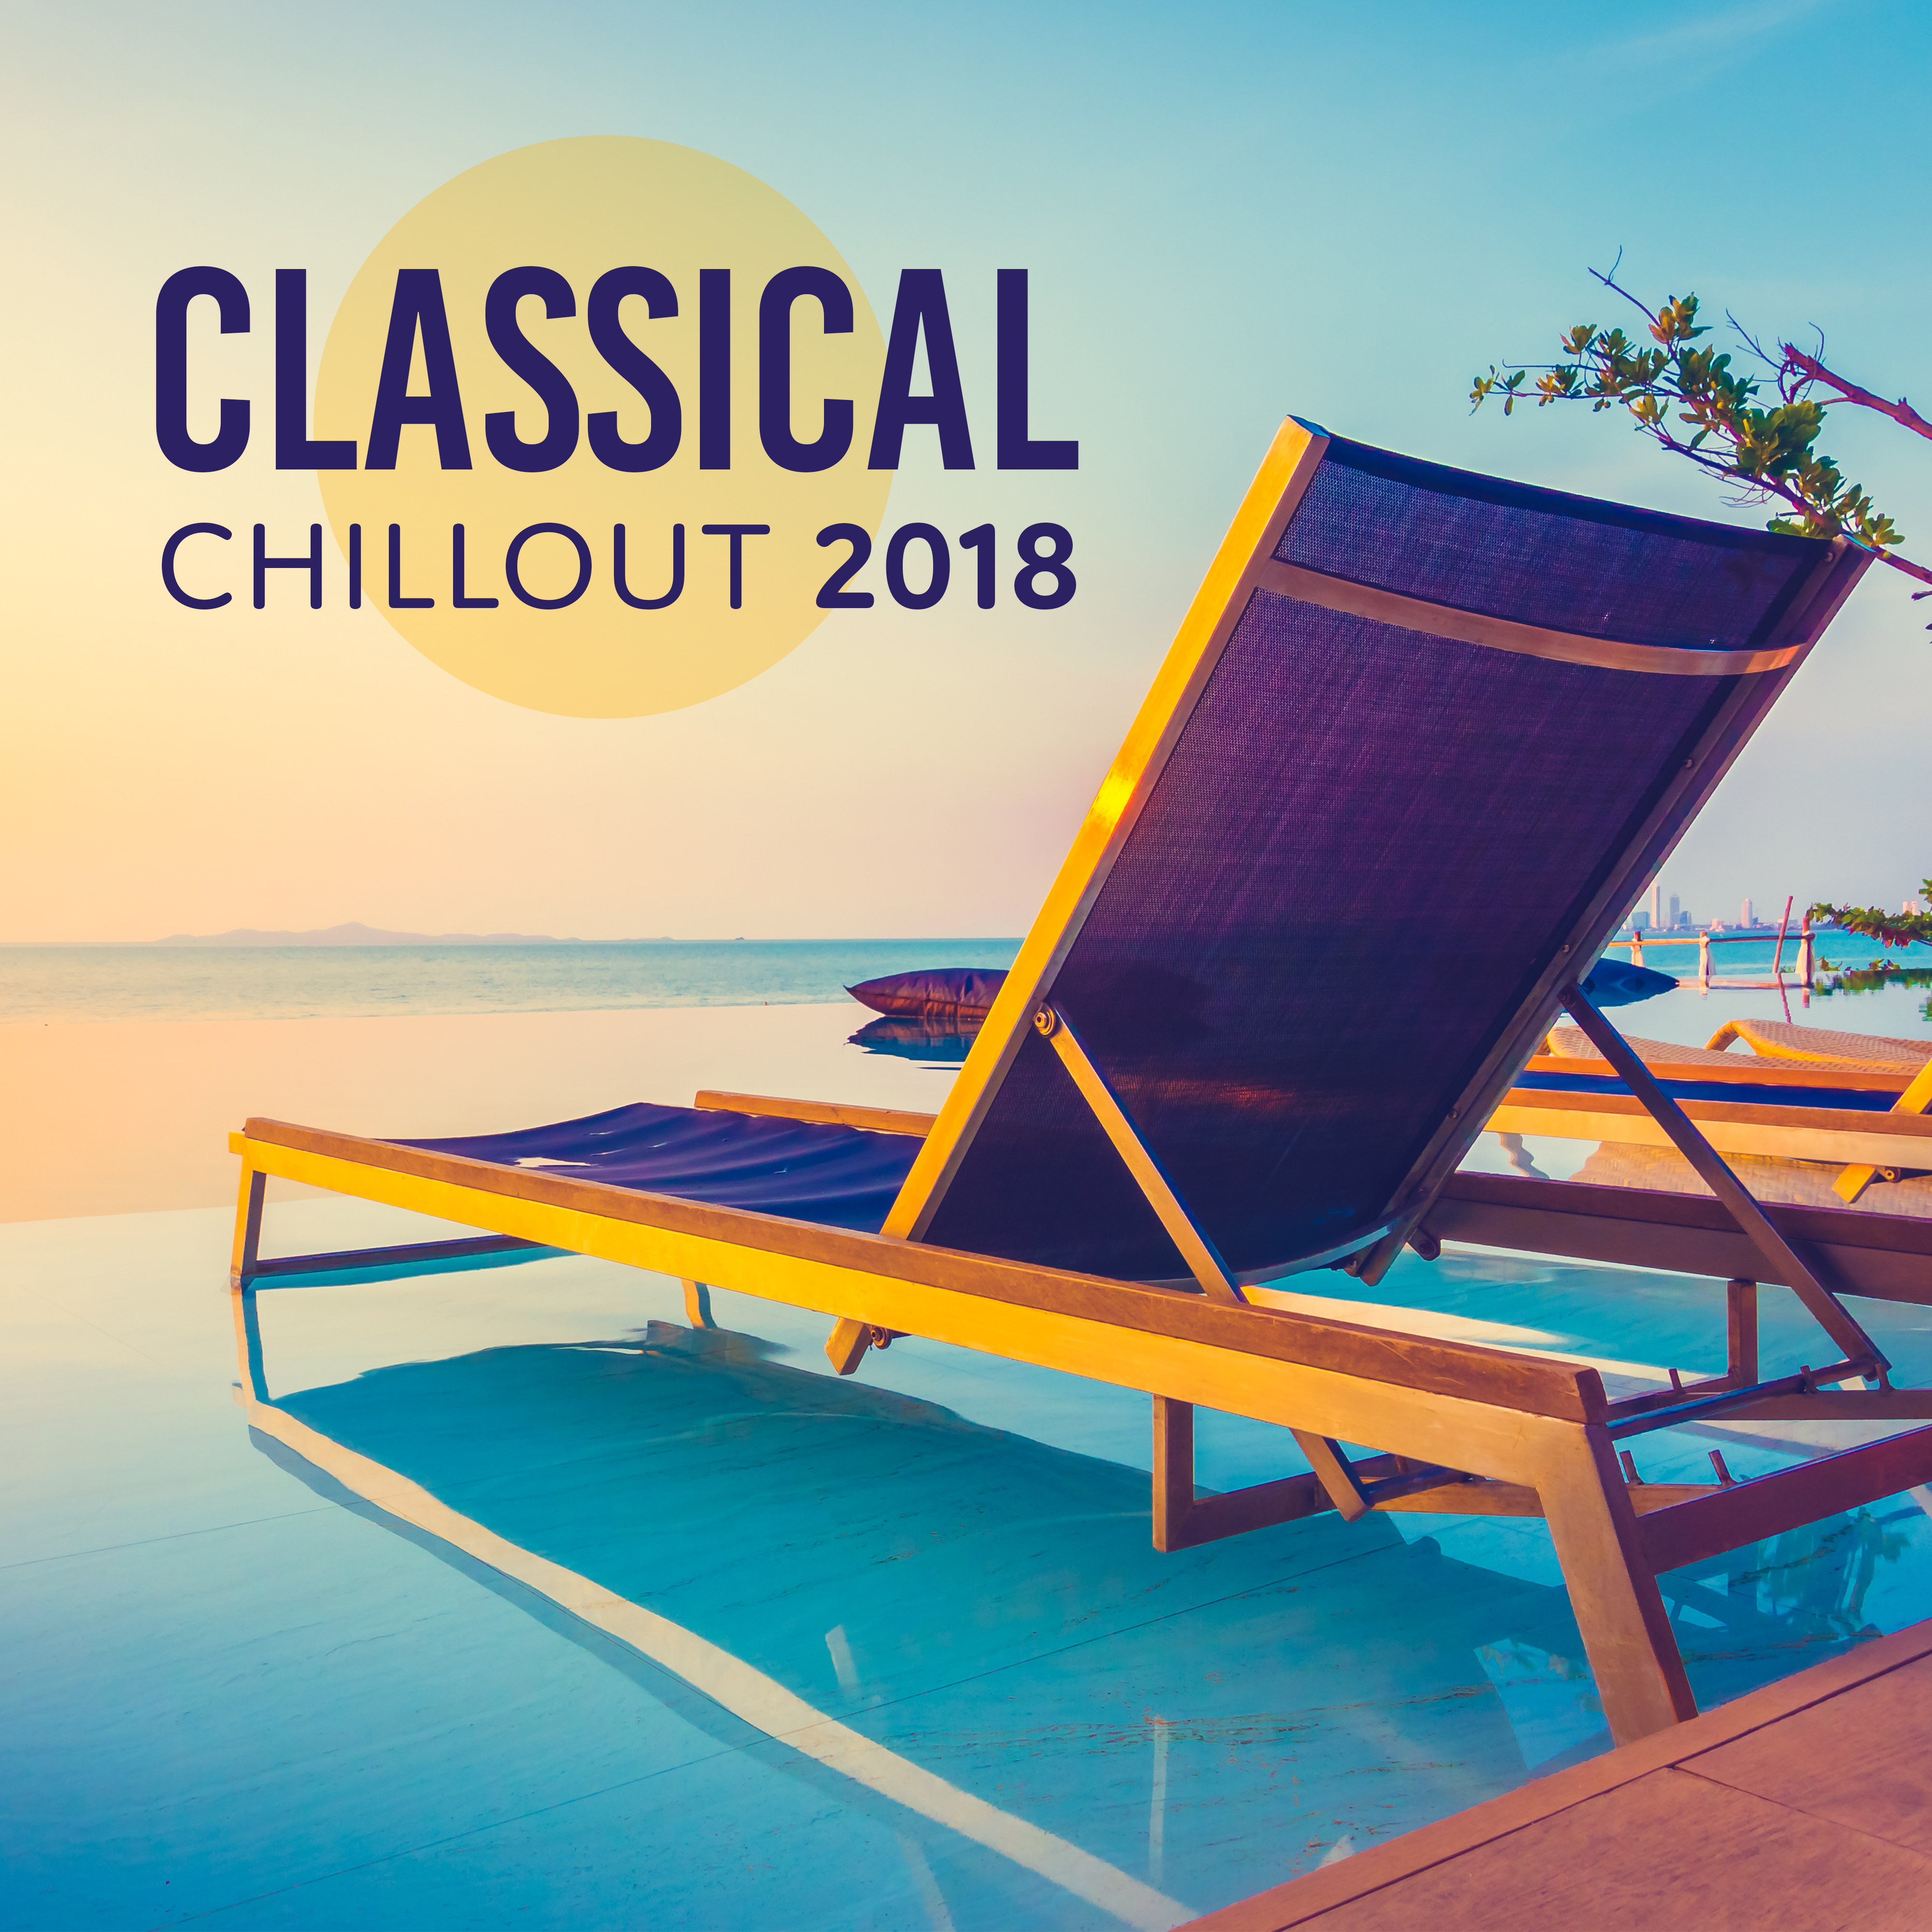 Classical Chillout 2018